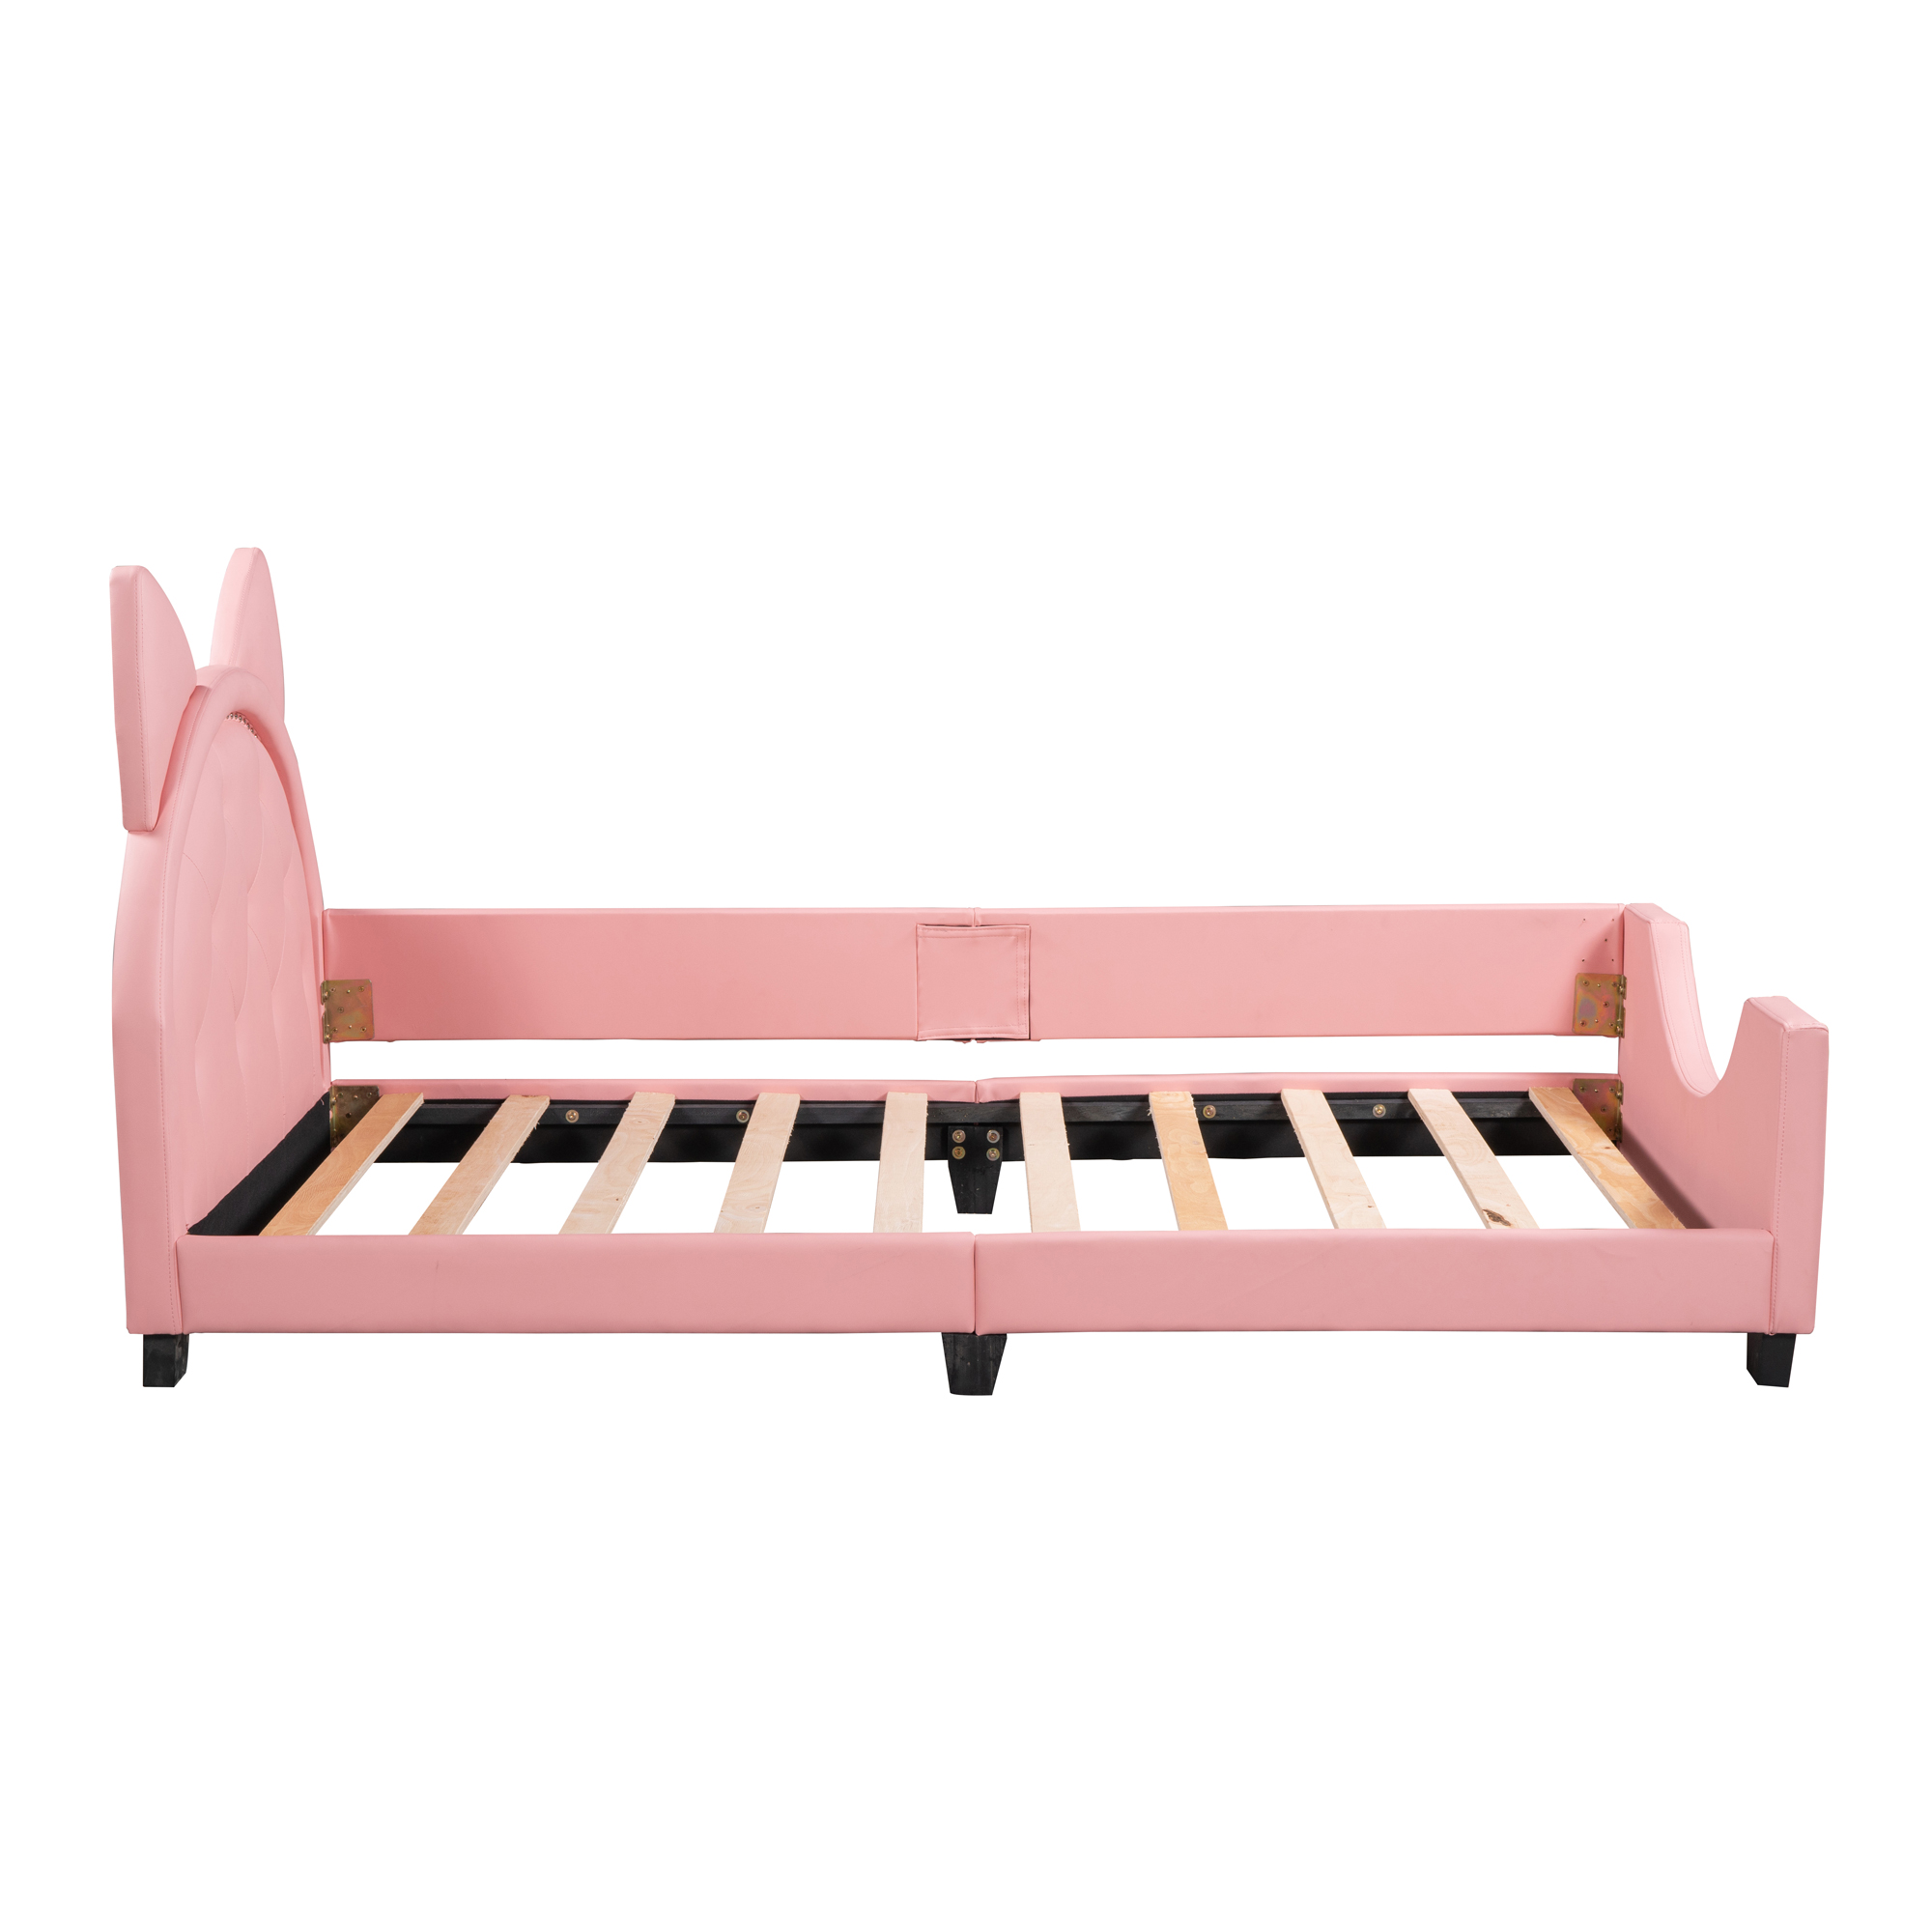 Bunny Shaped Twin Size Upholstery Daybed with Headboard for Kids, Pink - image 5 of 8